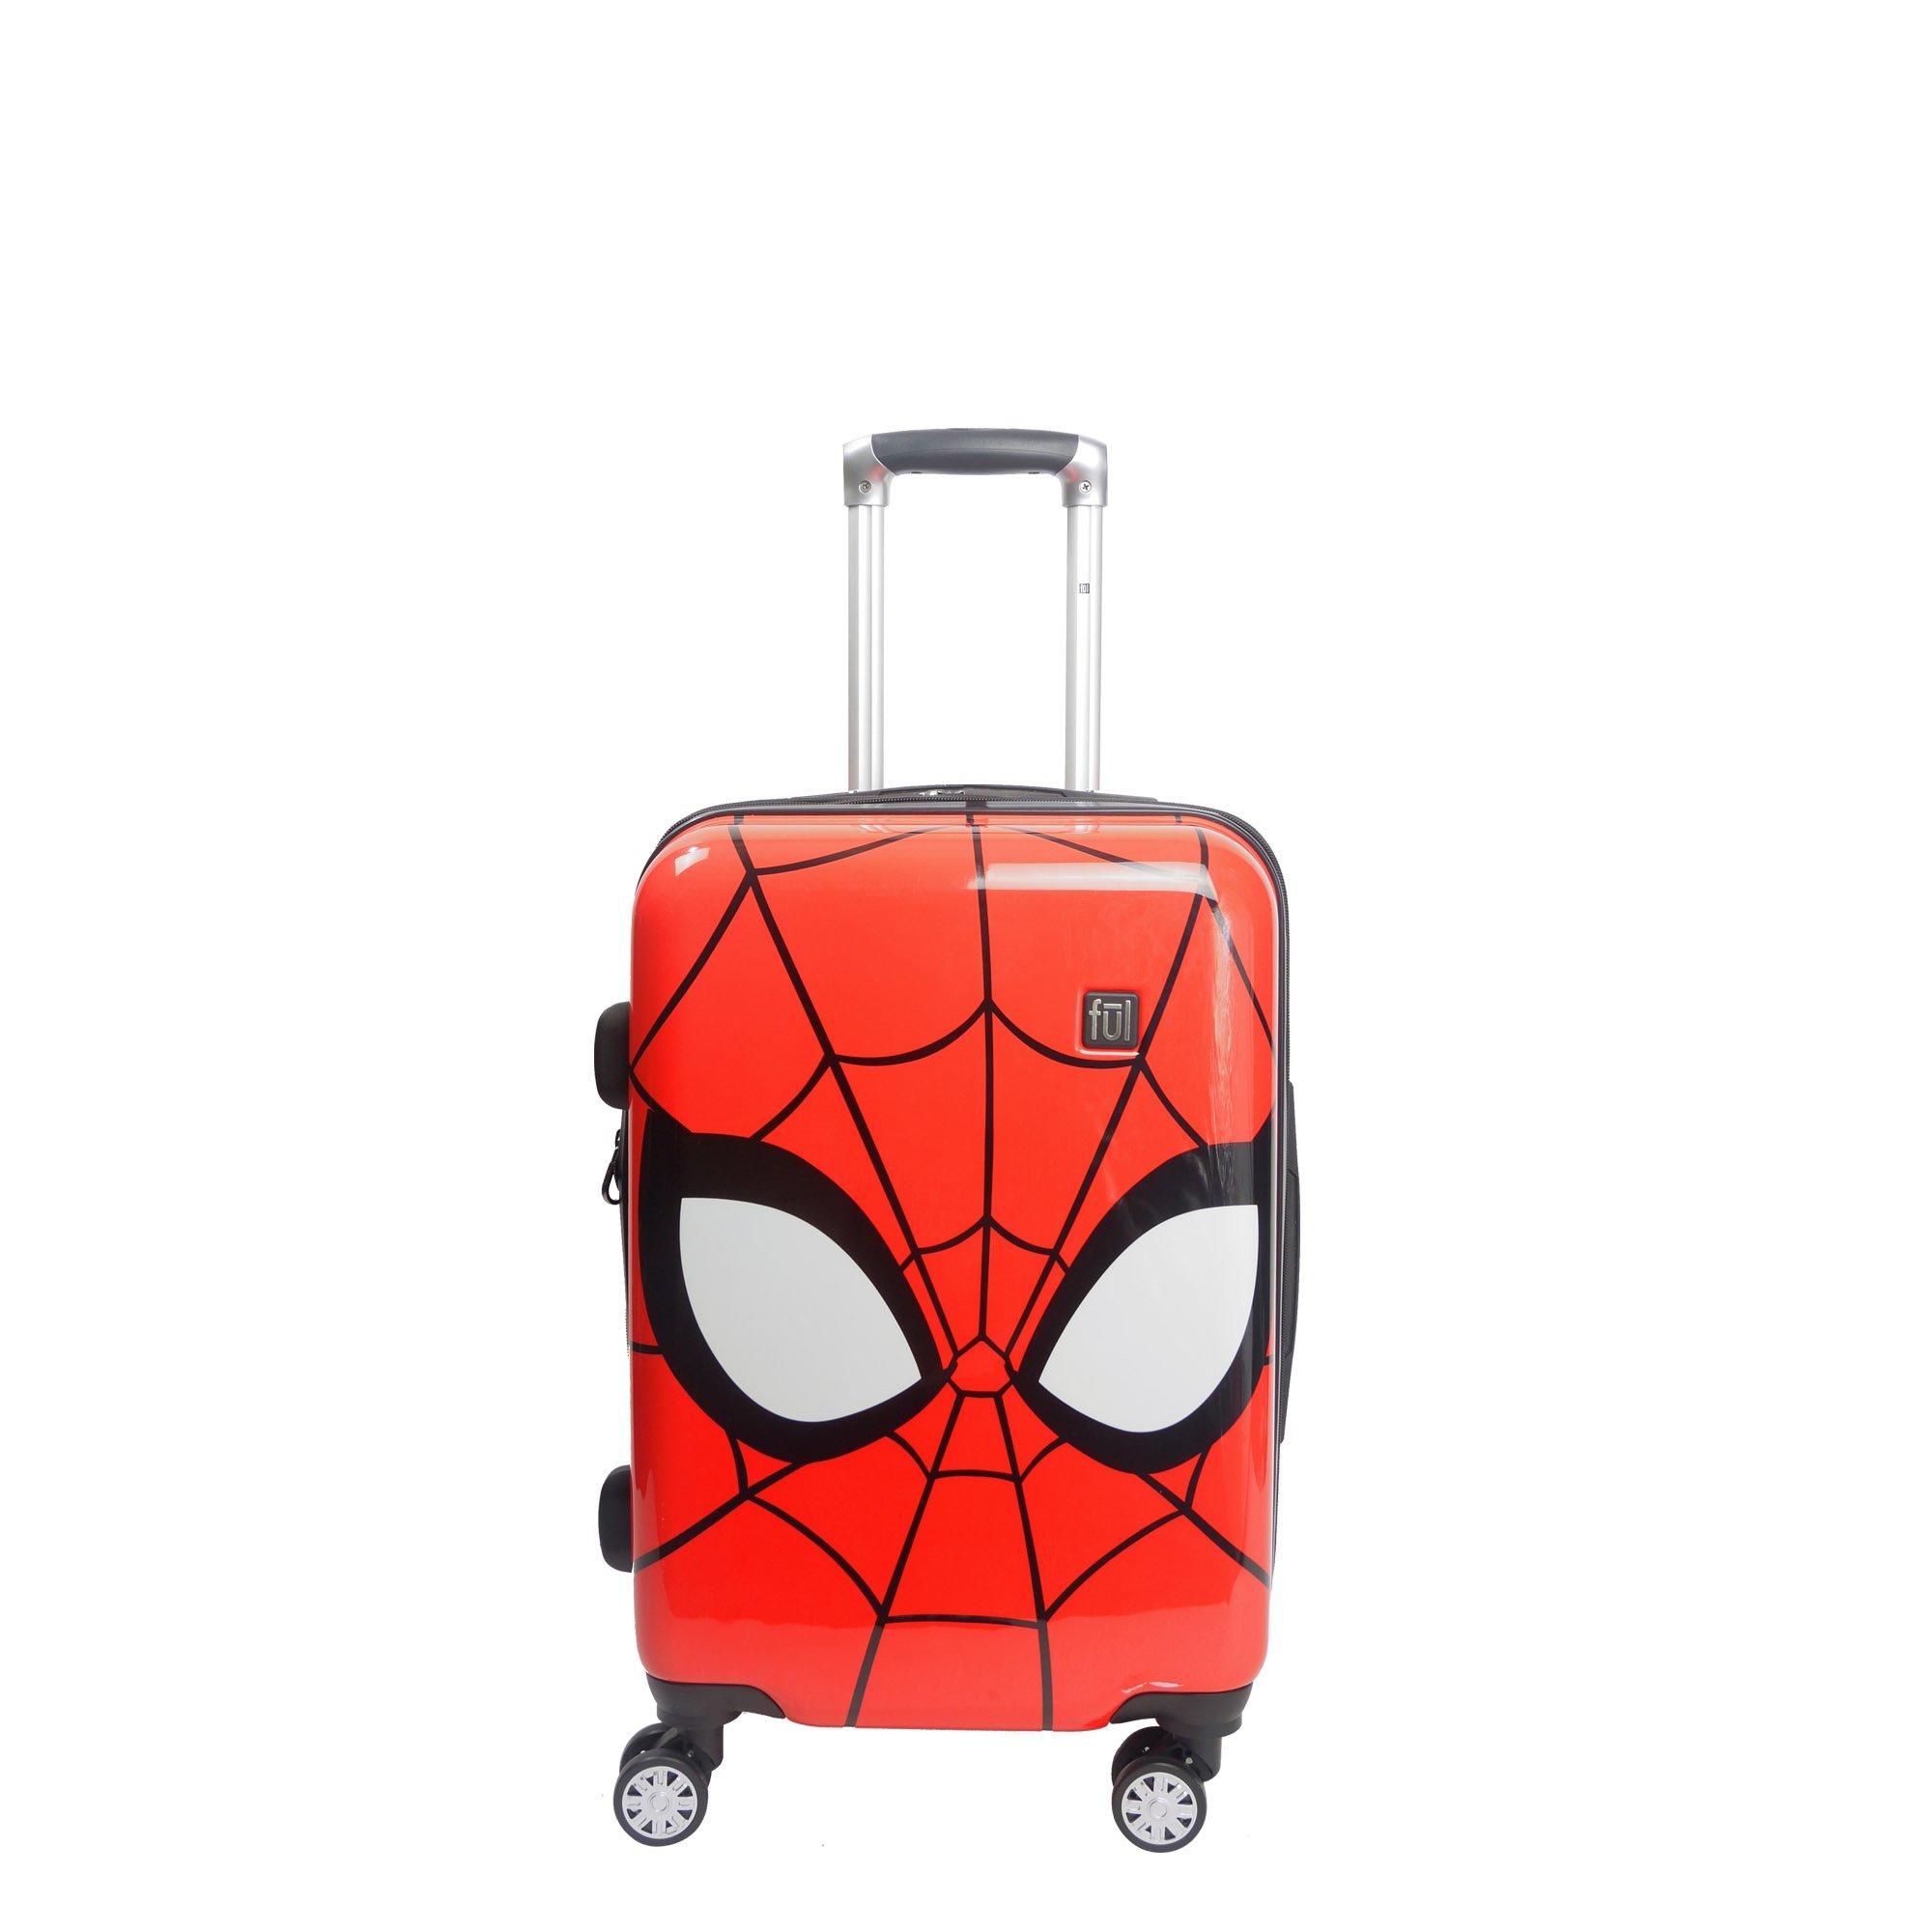 FUL Marvel Spiderman Big face 21" Hard Sided Carry on